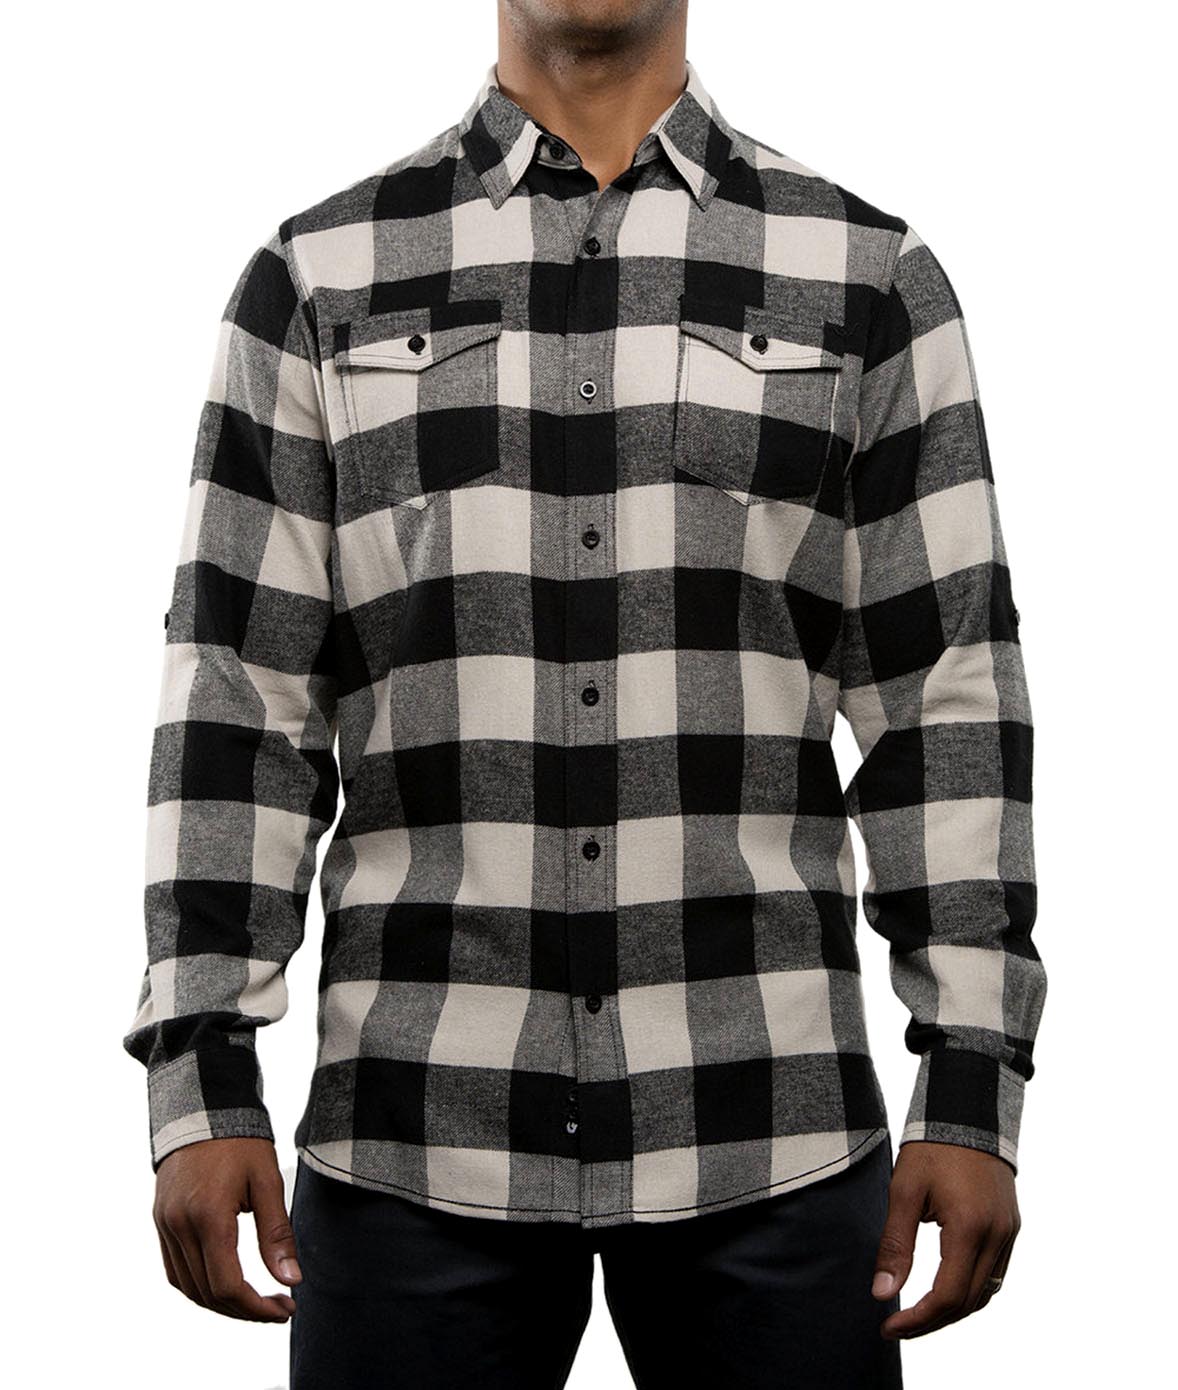 Shop Nayked Apparel Men's Ridiculously Soft Button Down Plaid Flannel Shirt  | Comfort Tops, Shirts.